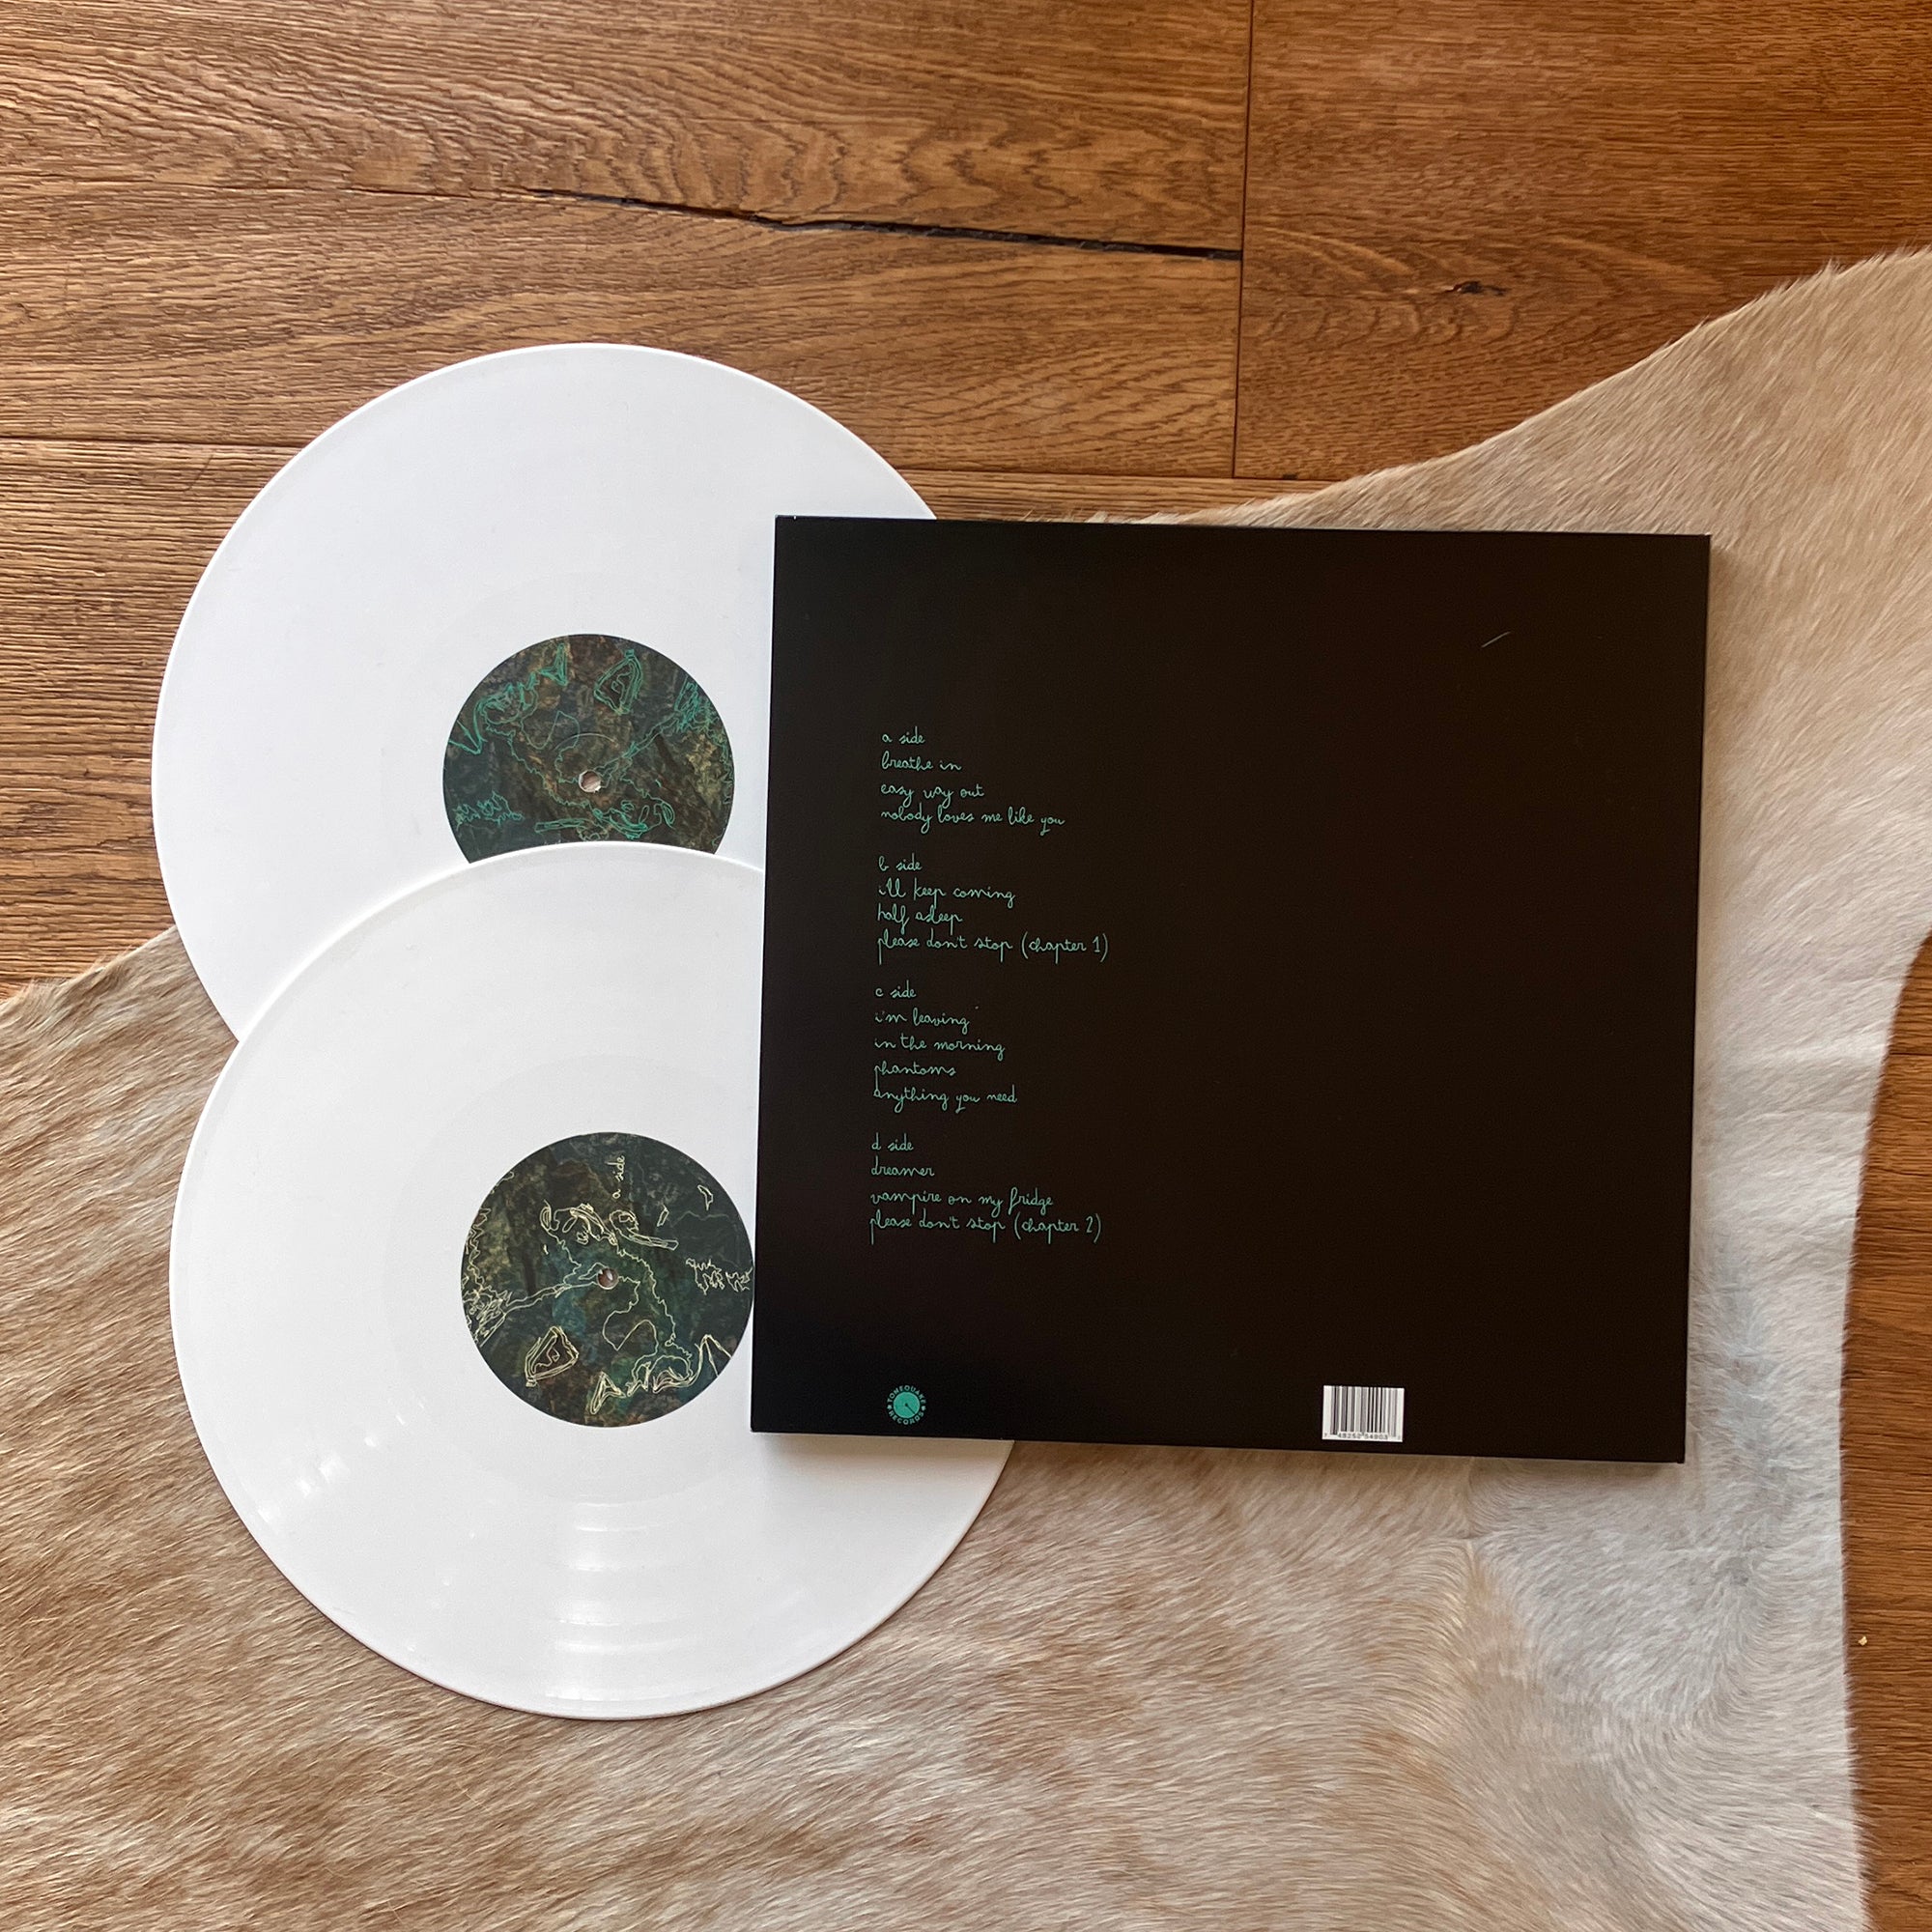 Low Roar - 0 White Vinyl with Remixed Cover Art - Bandwear